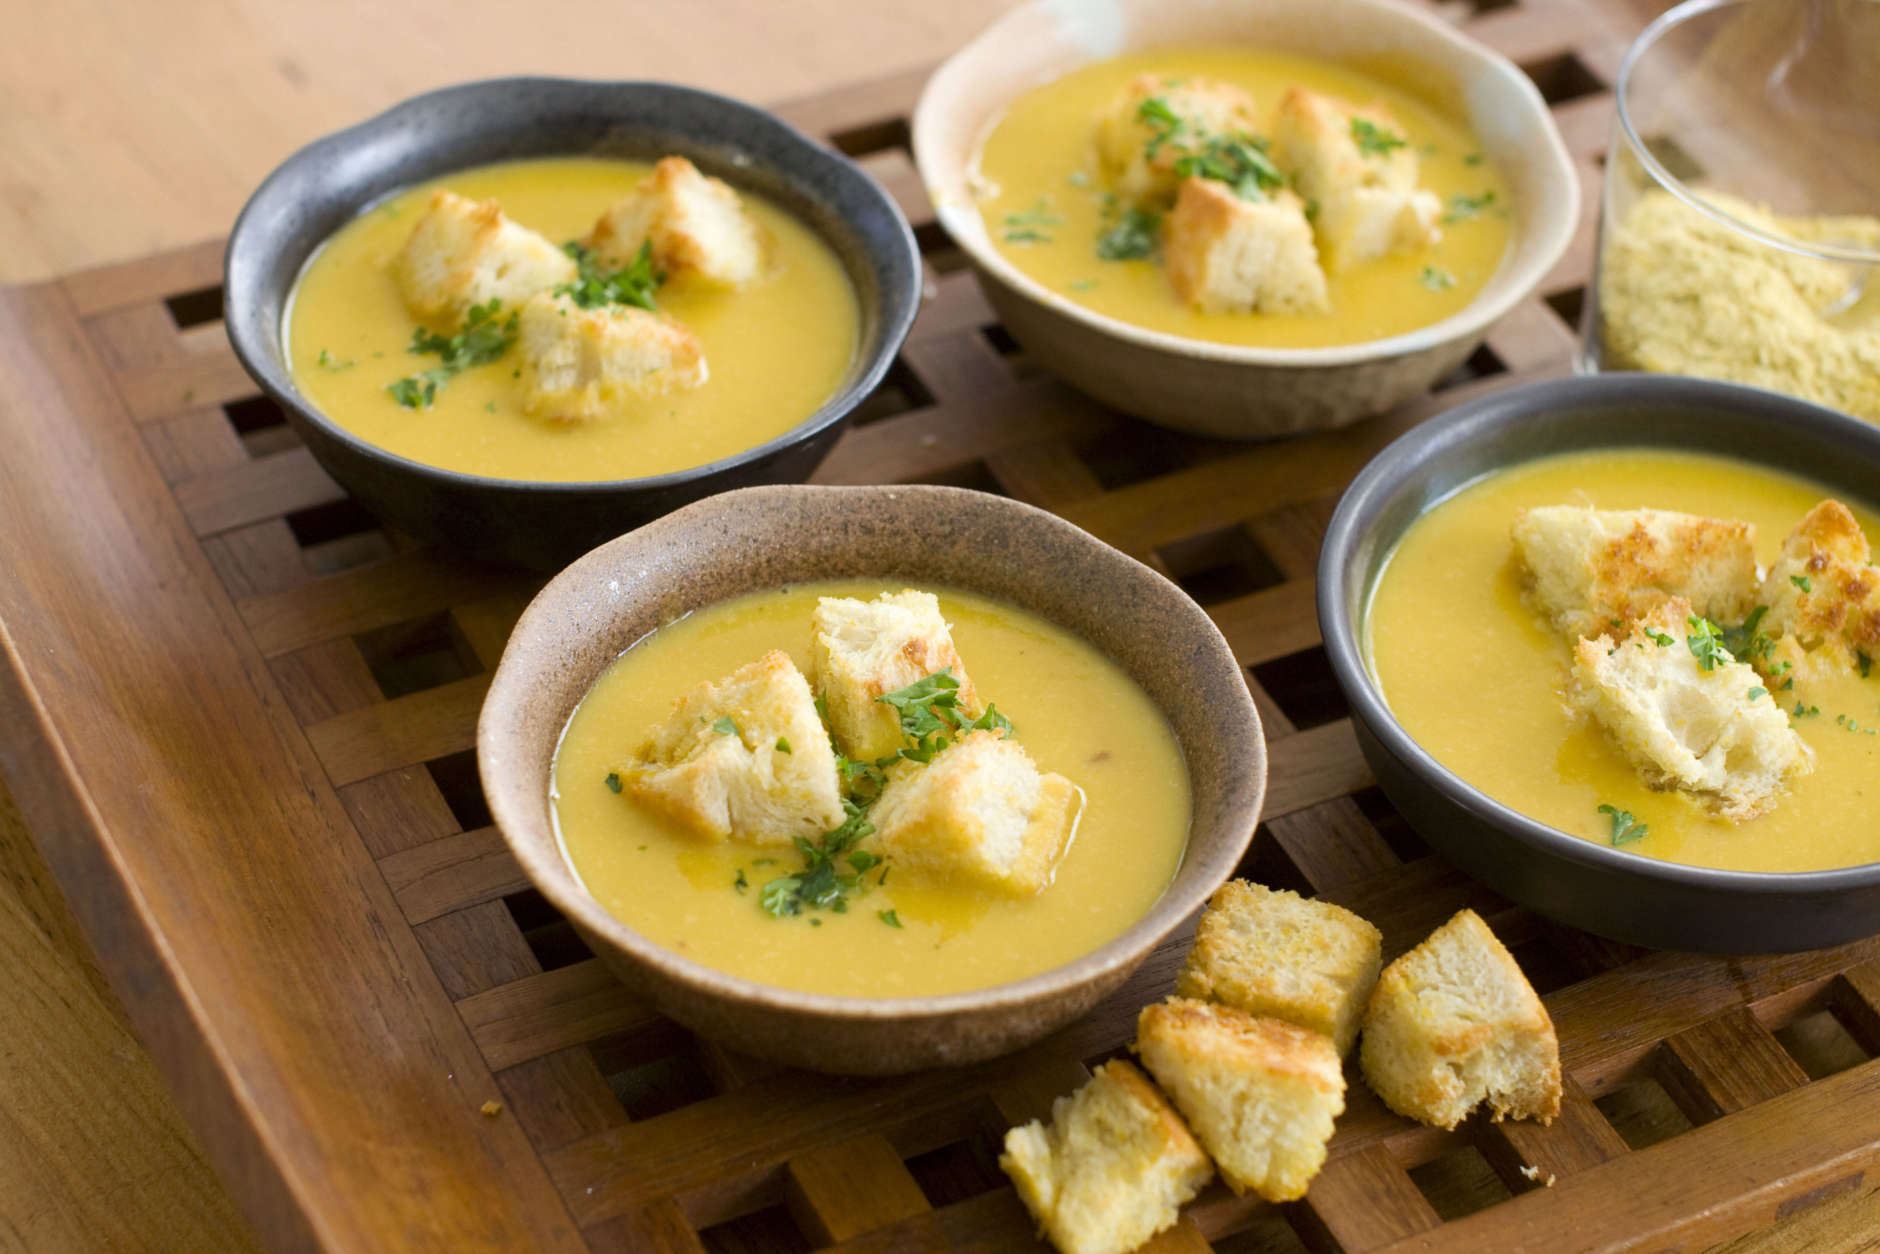 In this image taken on Feb. 13, 2012, nutritional yeast flakes lend a savory, cheesy flavor to this winter-friendly pumpkin and white bean soup with sourdough croutons as shown in Concord, N.H. (AP Photo/Matthew Mead)